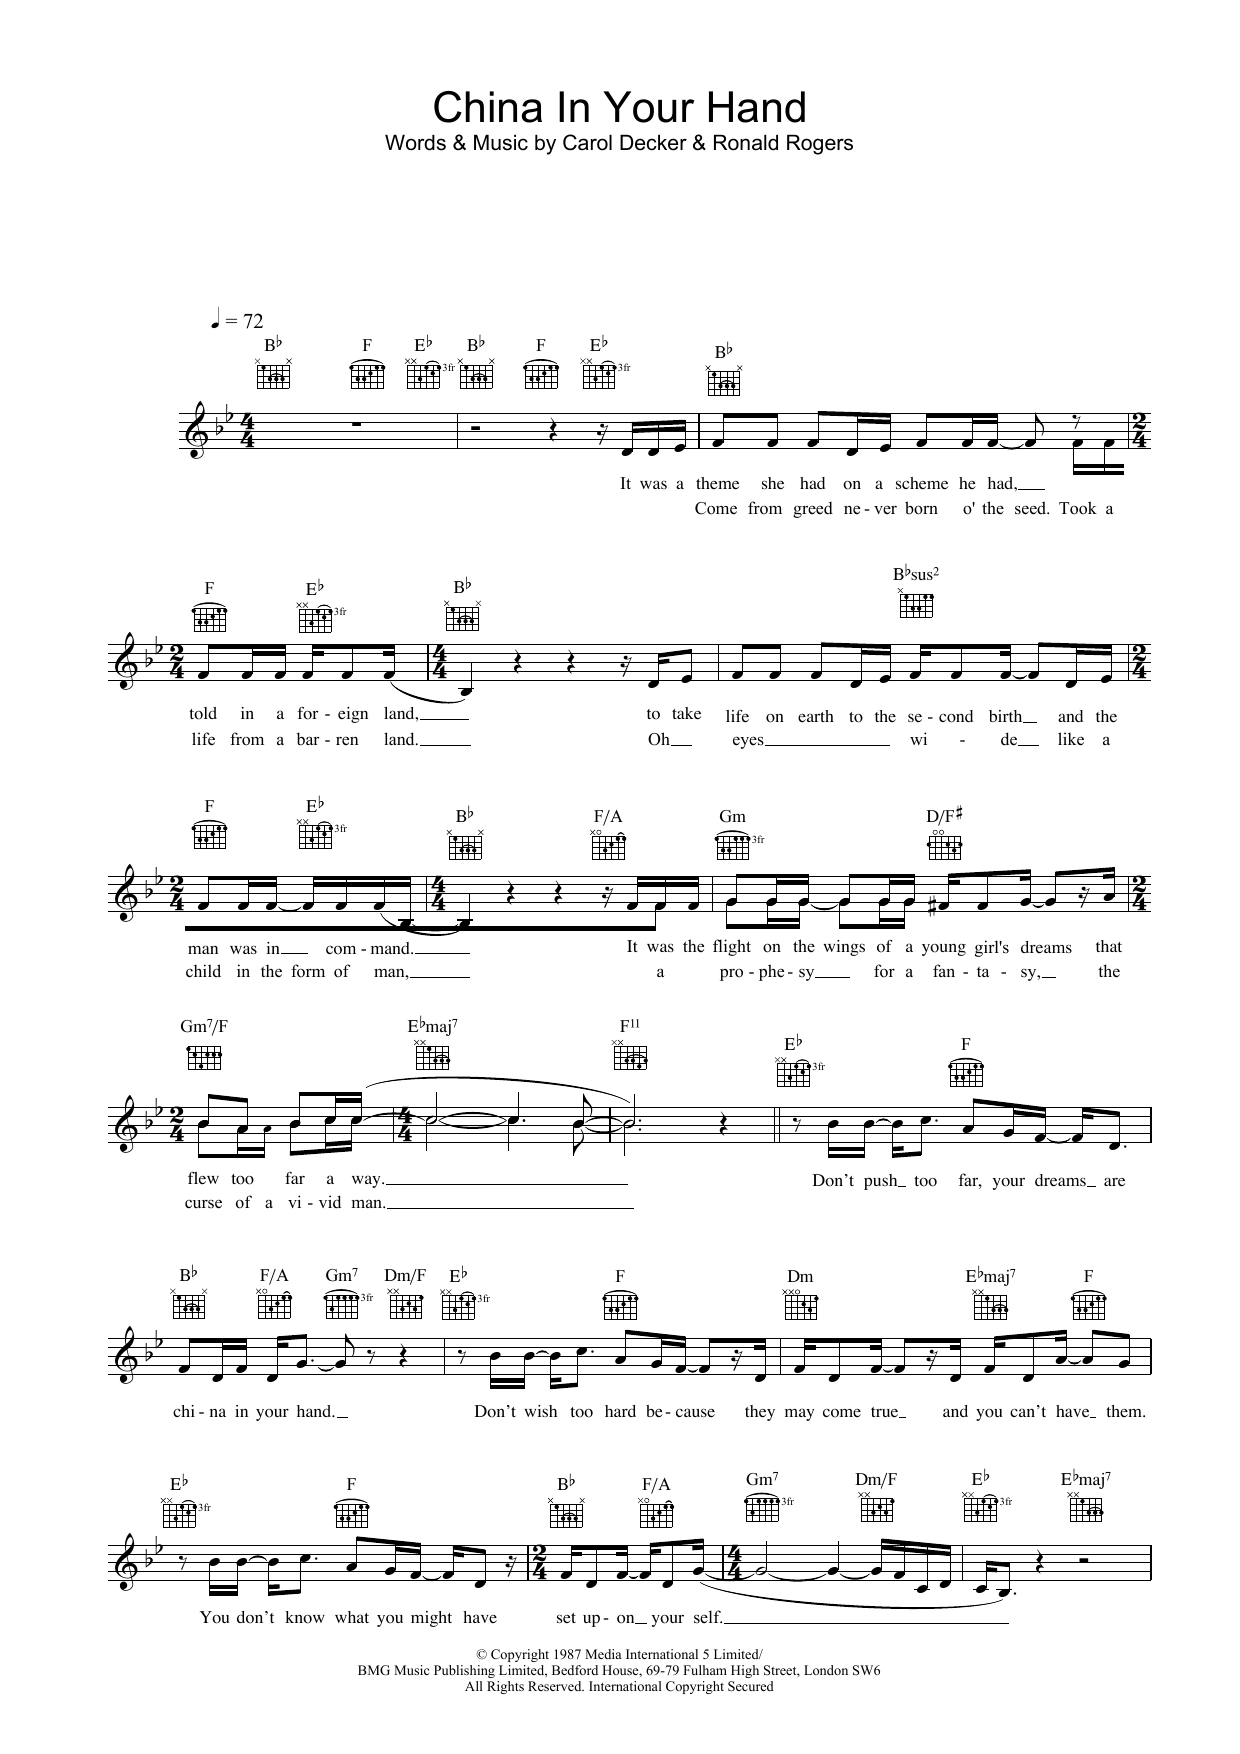 Download Carol Decker China In Your Hand Sheet Music